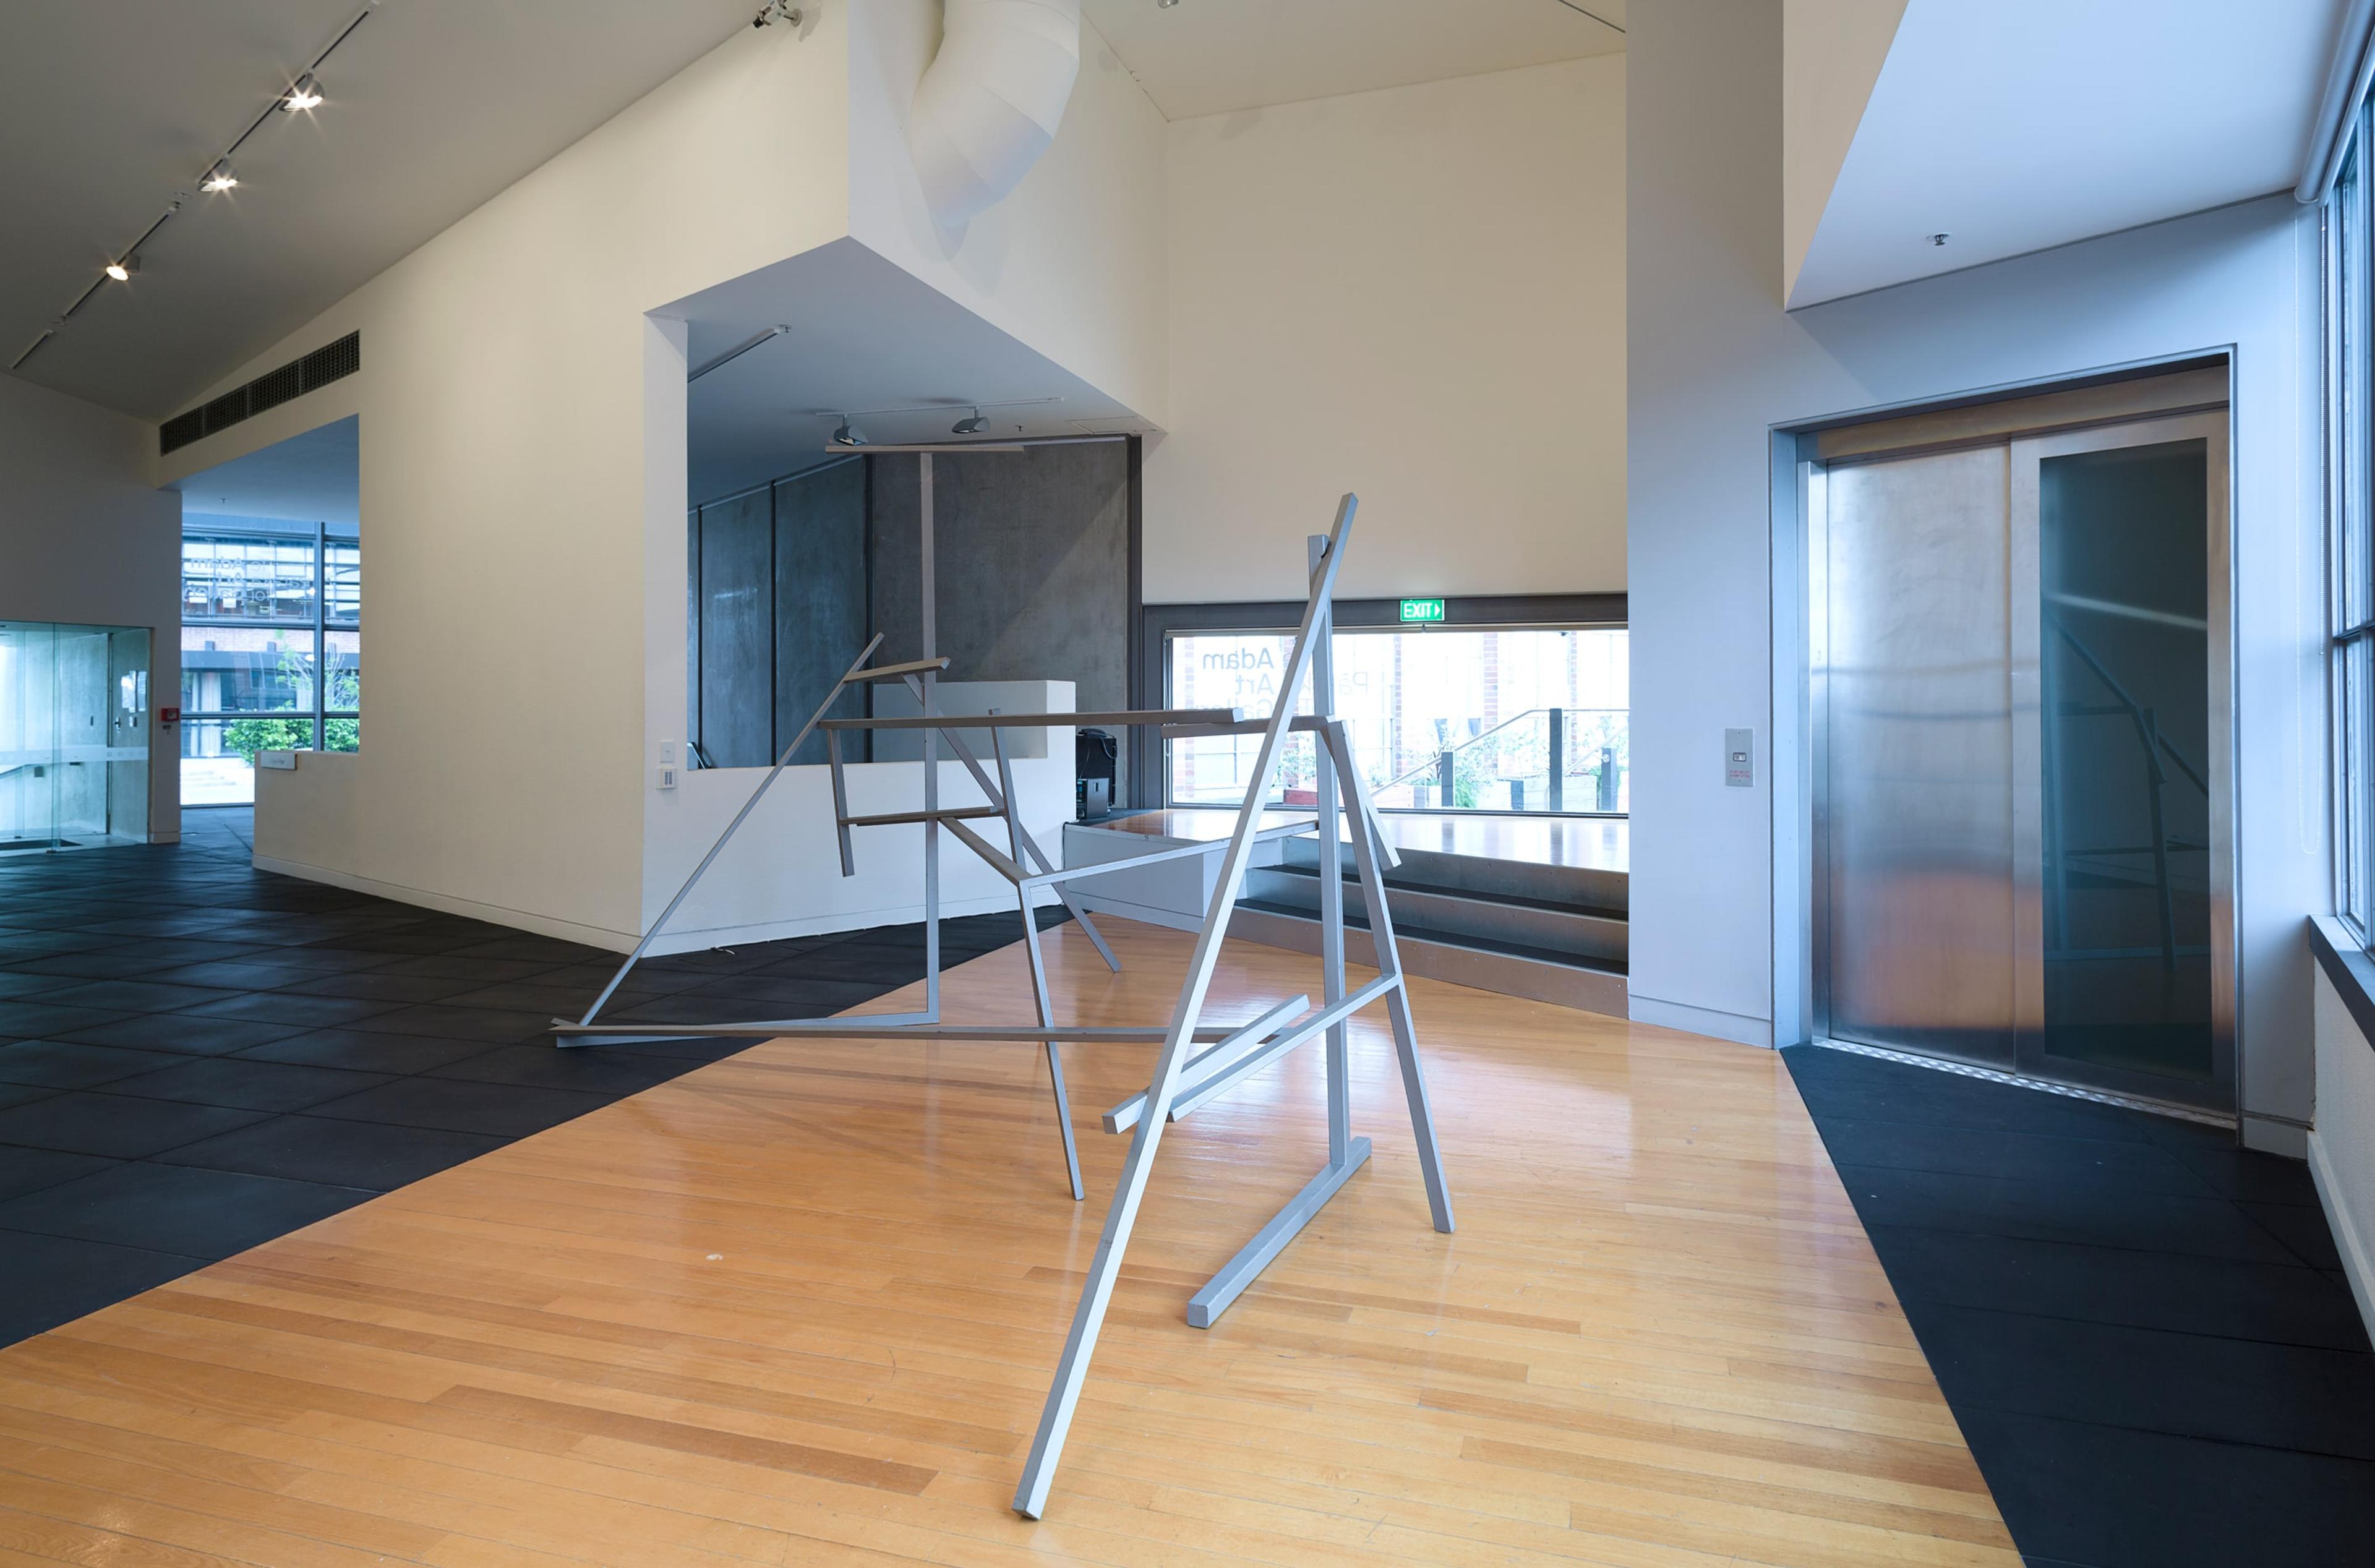 Installation view of John Panting: Spatial Constructions at the Adam Art Gallery, showing 5.07 (Untitled III), 1972–73, steel, 290 x 455 x 244cm. Collection of Auckland Art Gallery Toi o Tāmaki, purchased 1976. Photo: Shaun Waugh